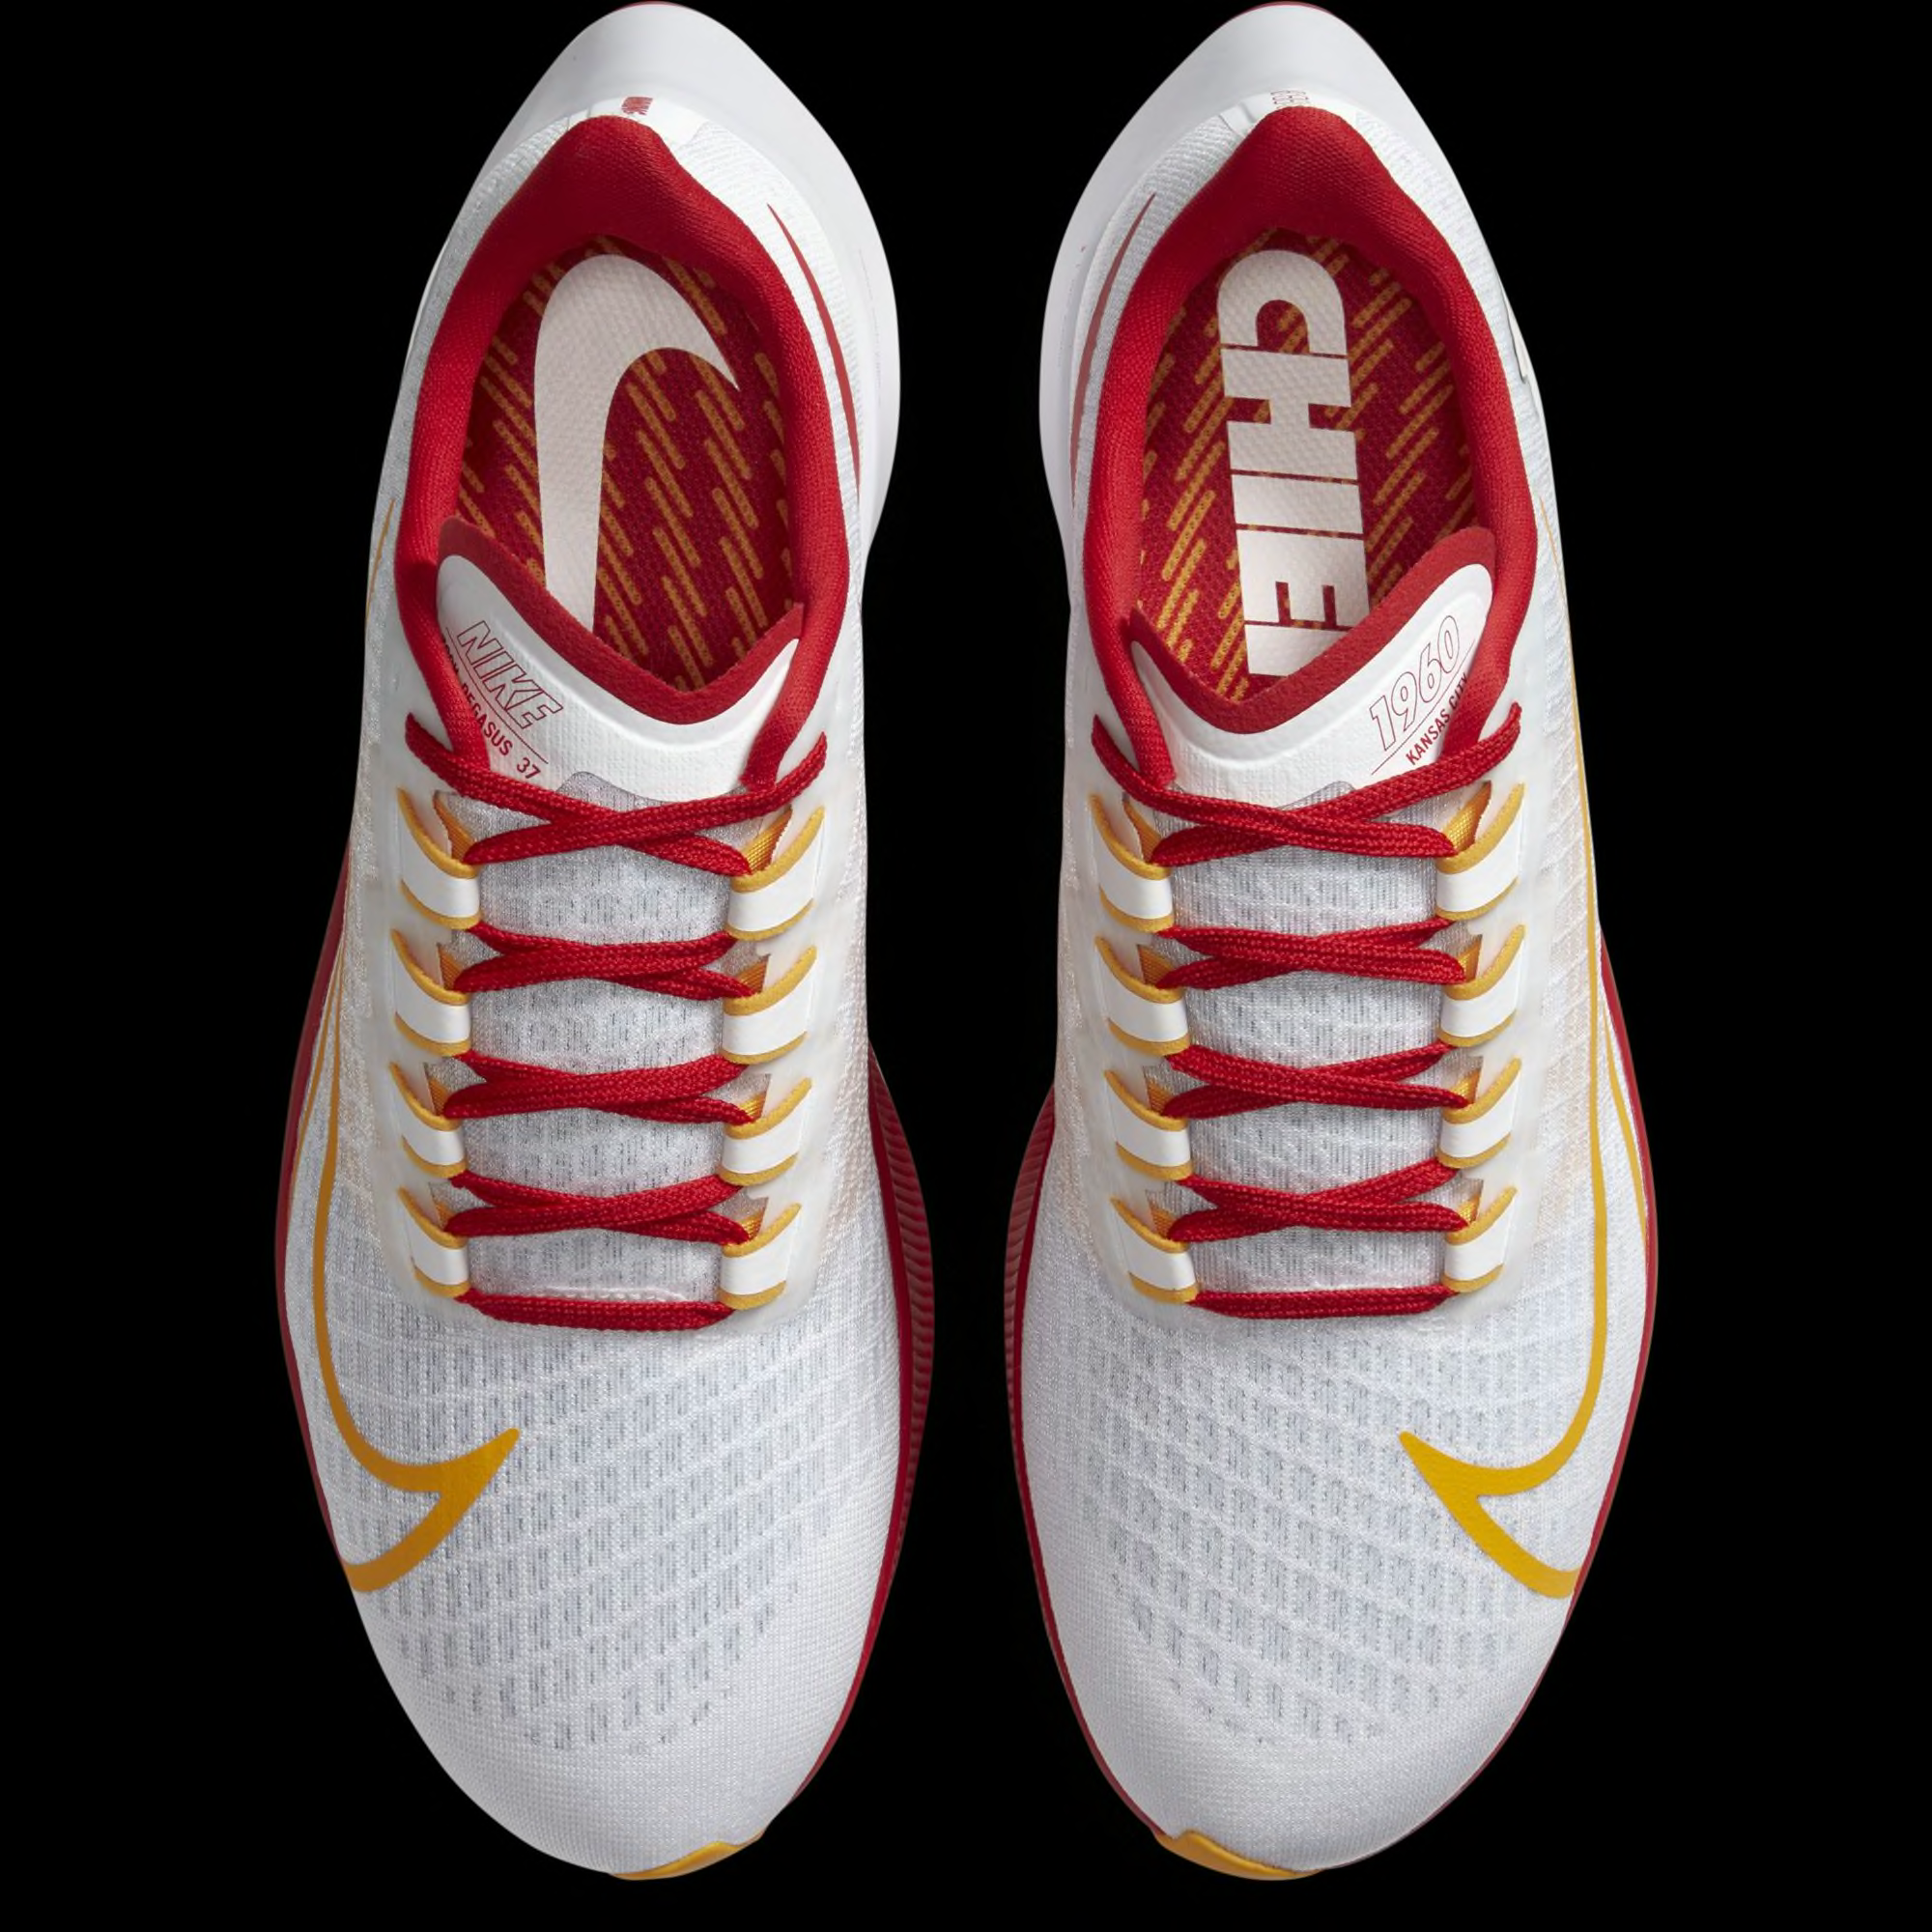 Order your Kansas City Chiefs Nike running shoes now